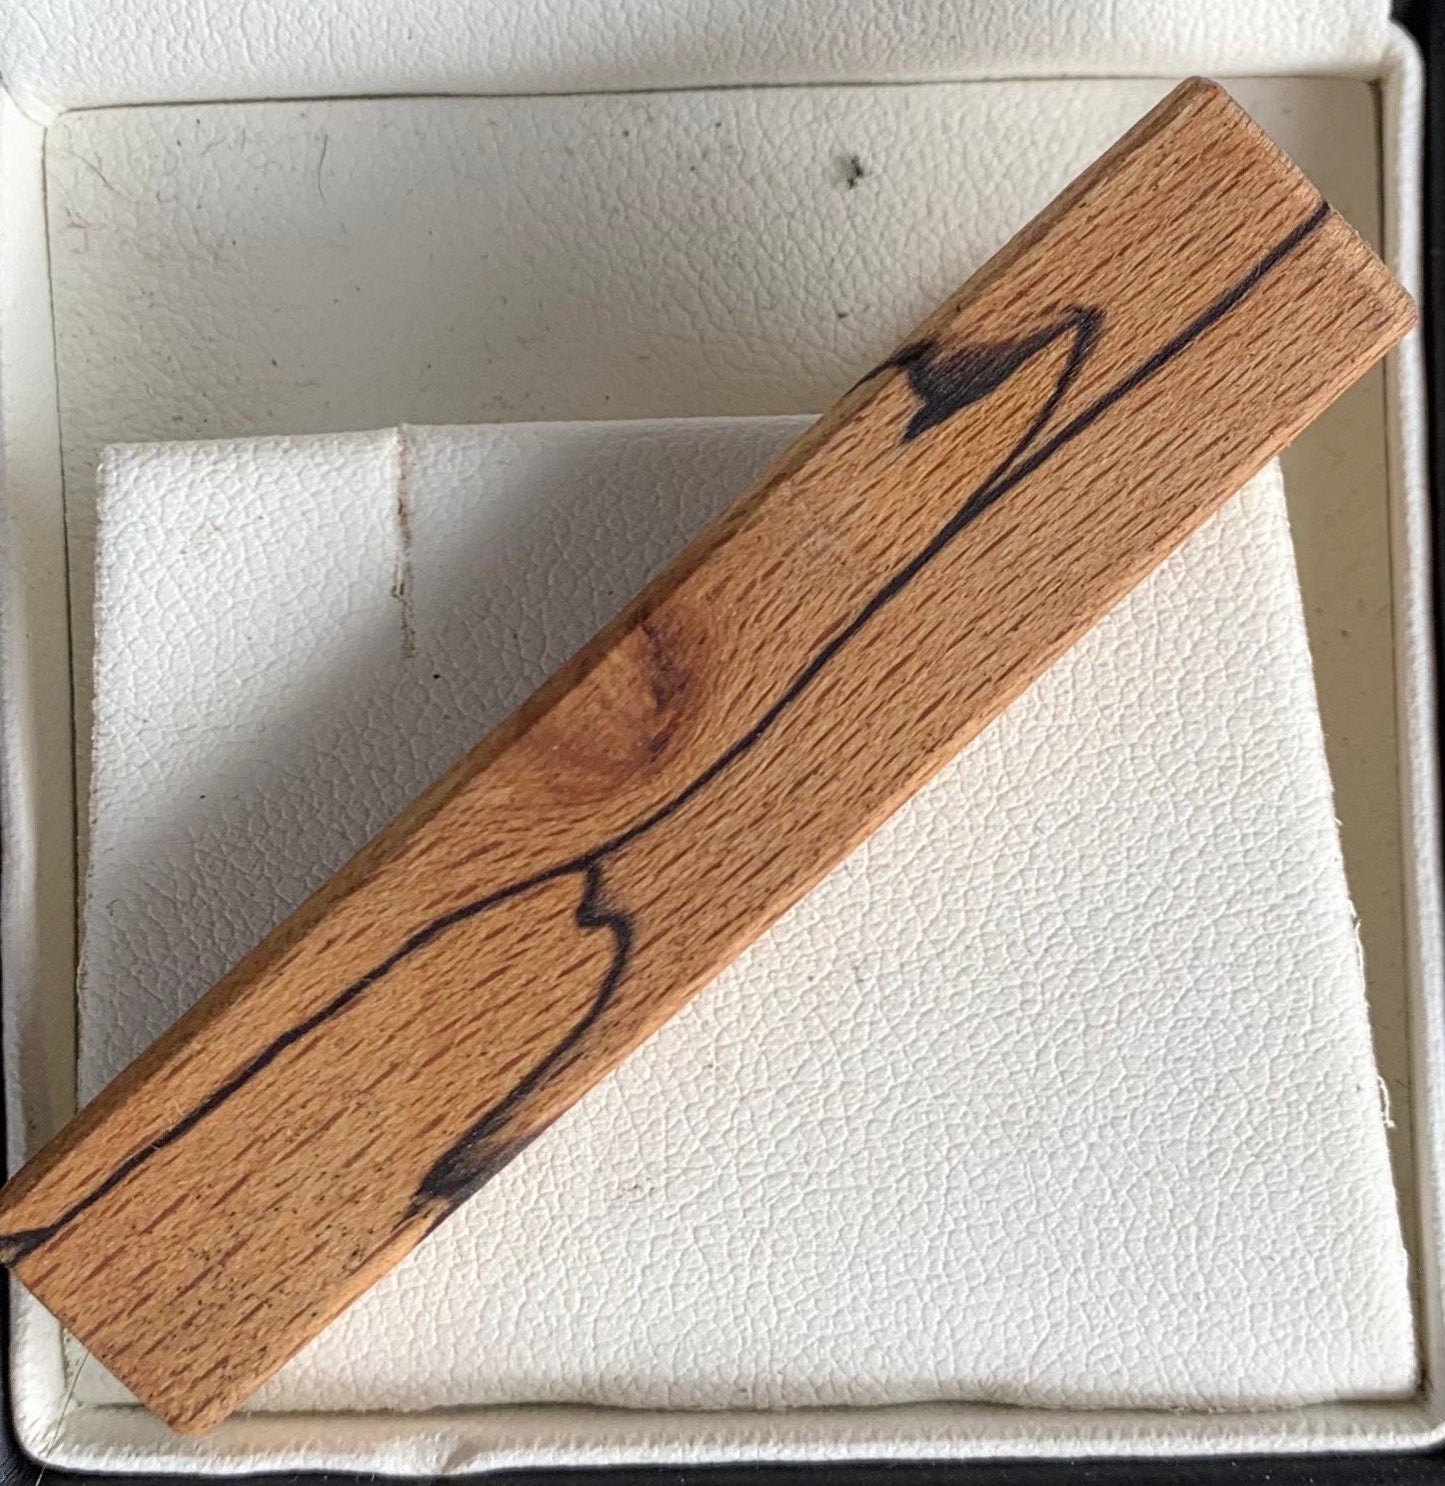 Tie pin/clip made from spalted beech